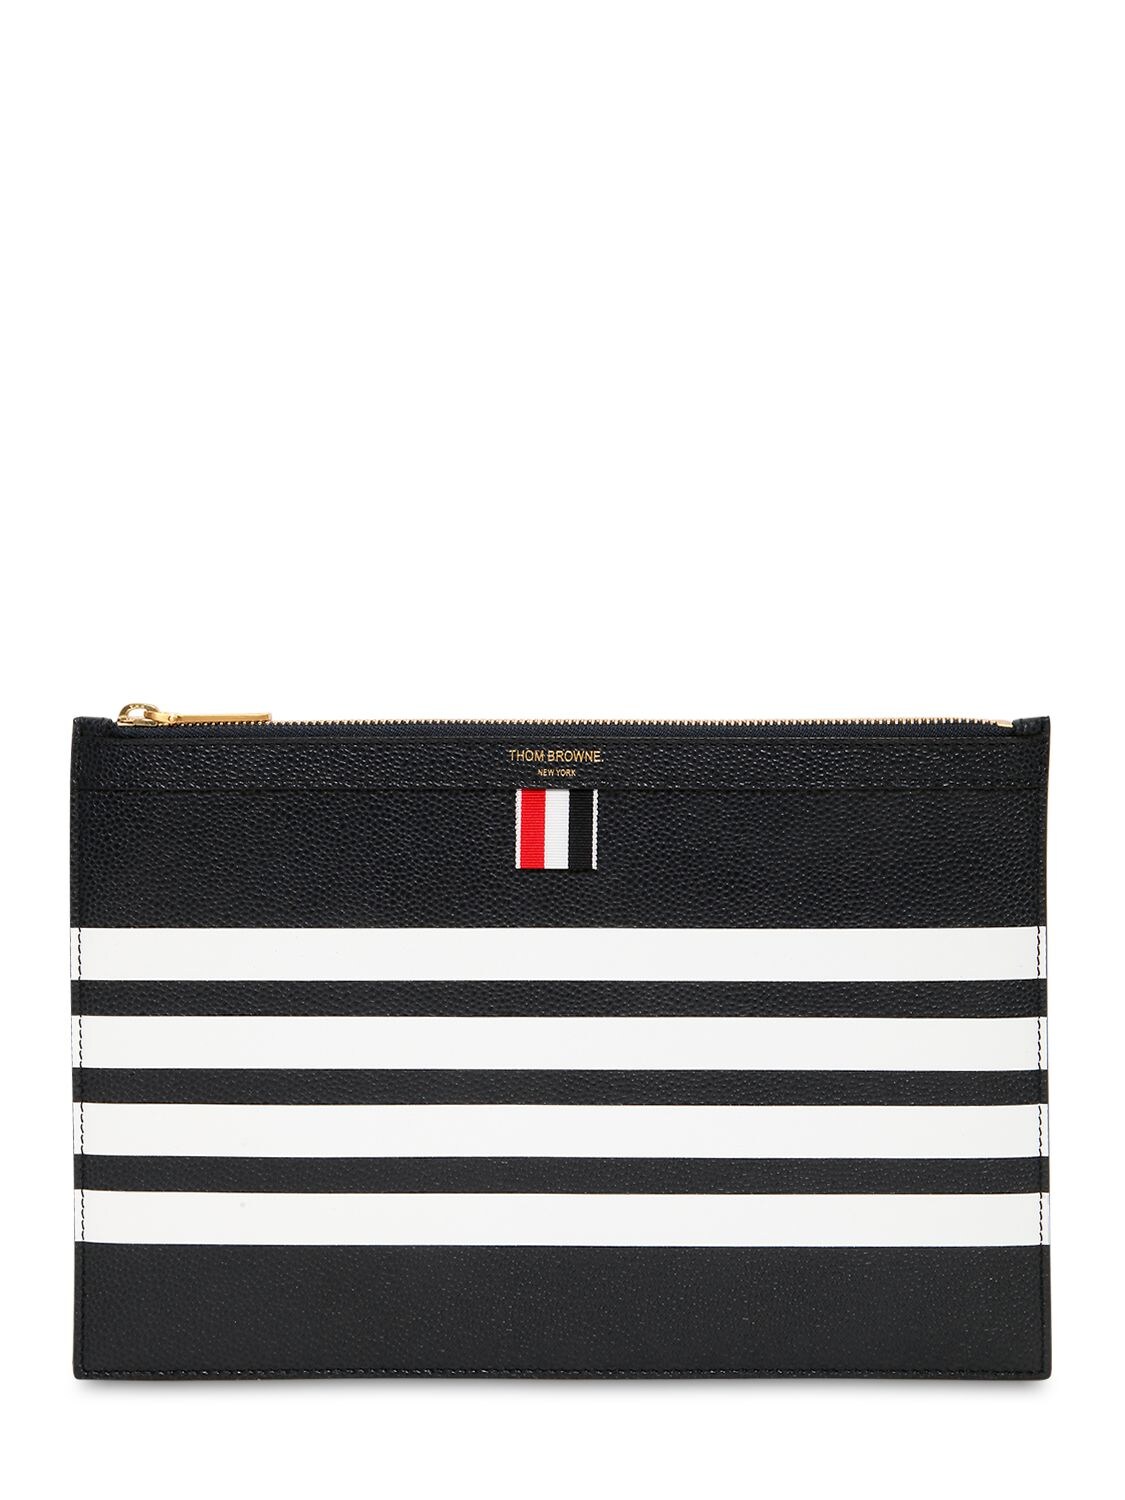 Thom Browne Small Zipper Pebbled Leather Pouch In Navy